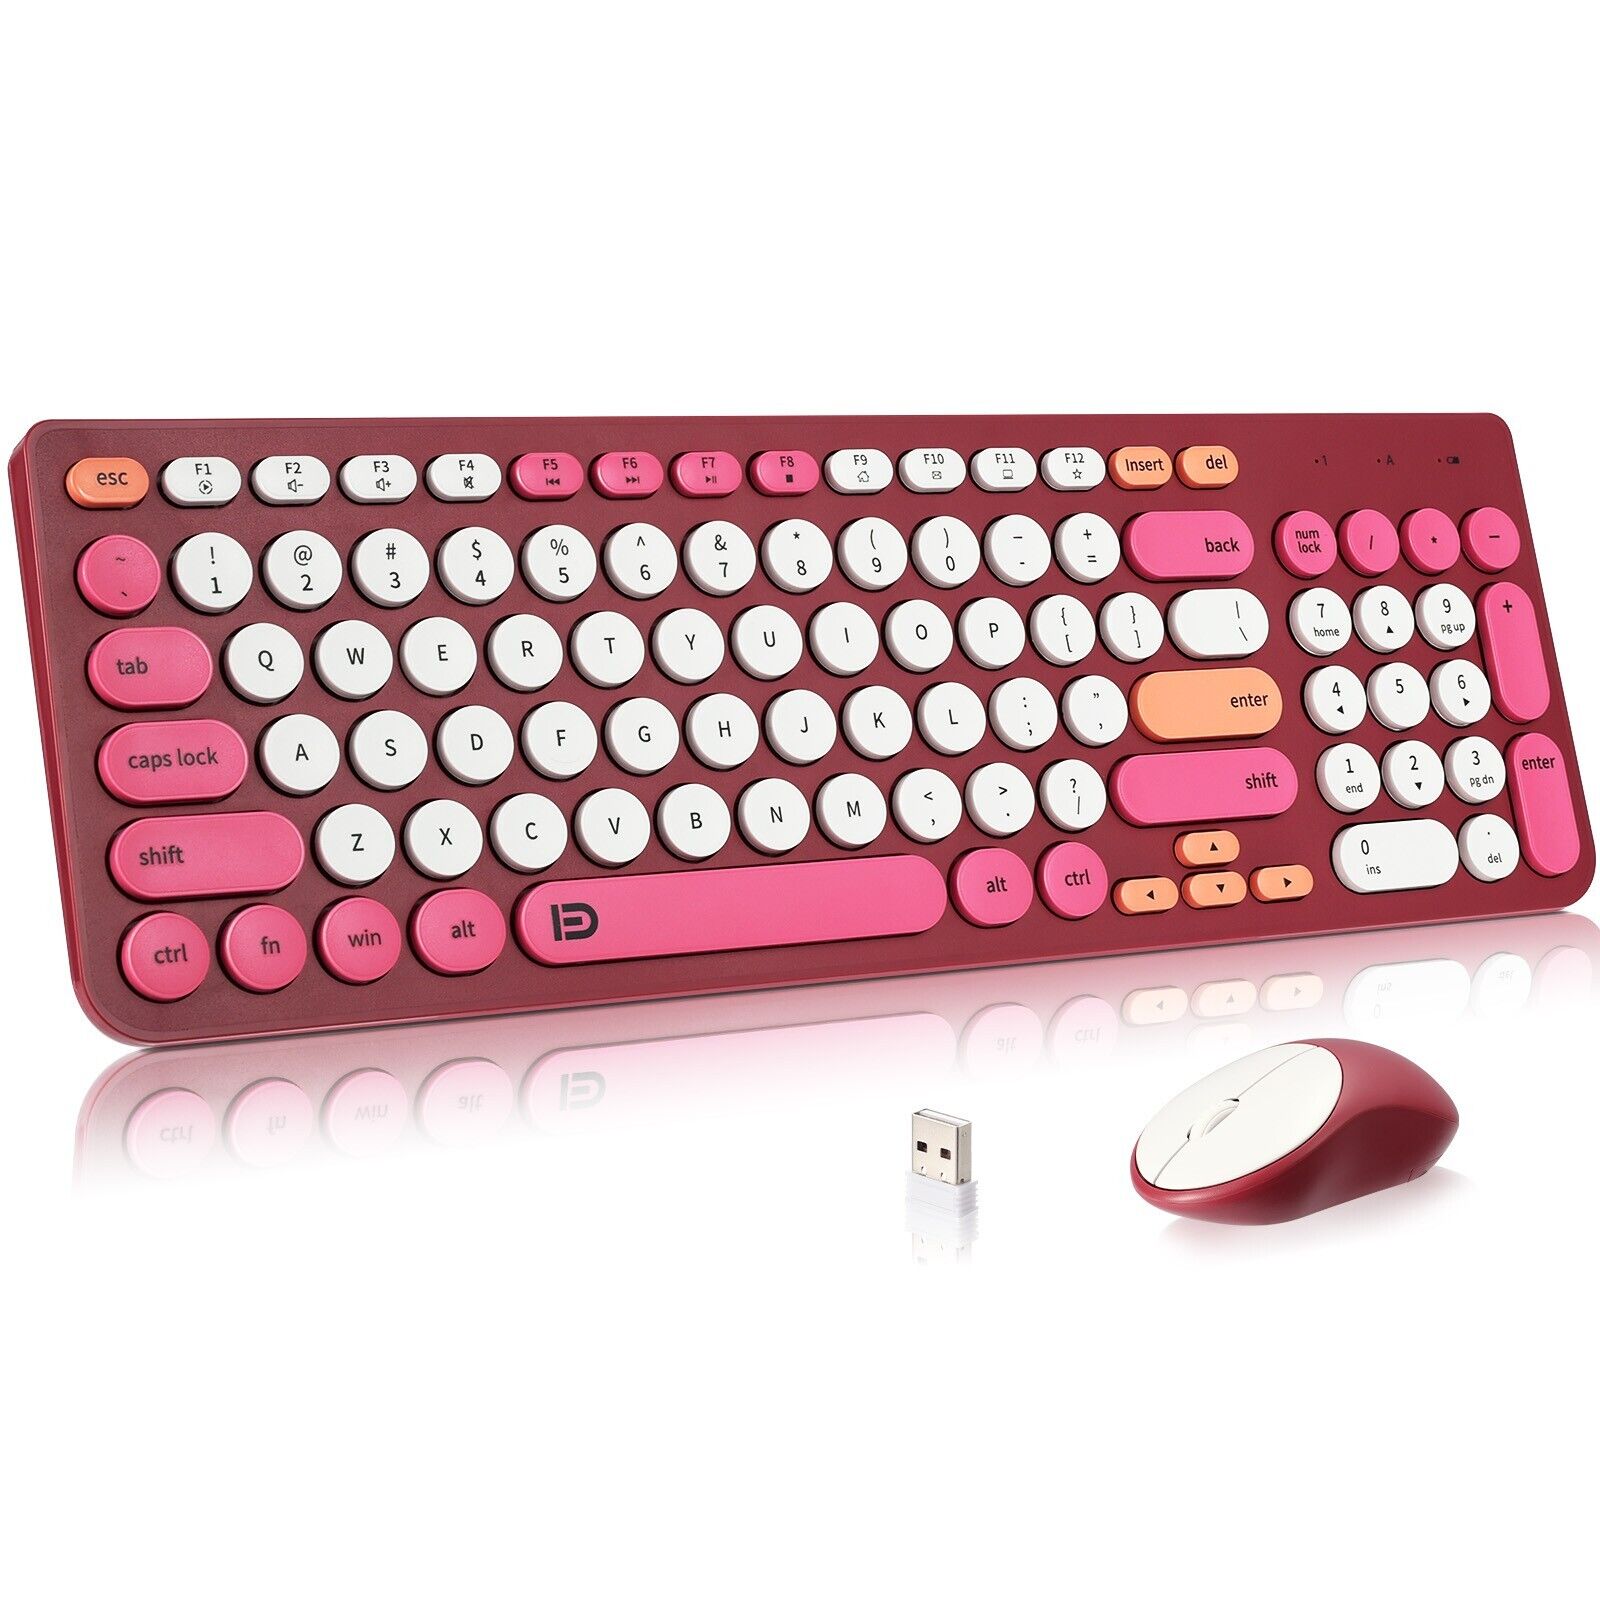 2.4G Wireless Retro Punk Round Keycap keyboard and Mouse Combo for PC Laptop